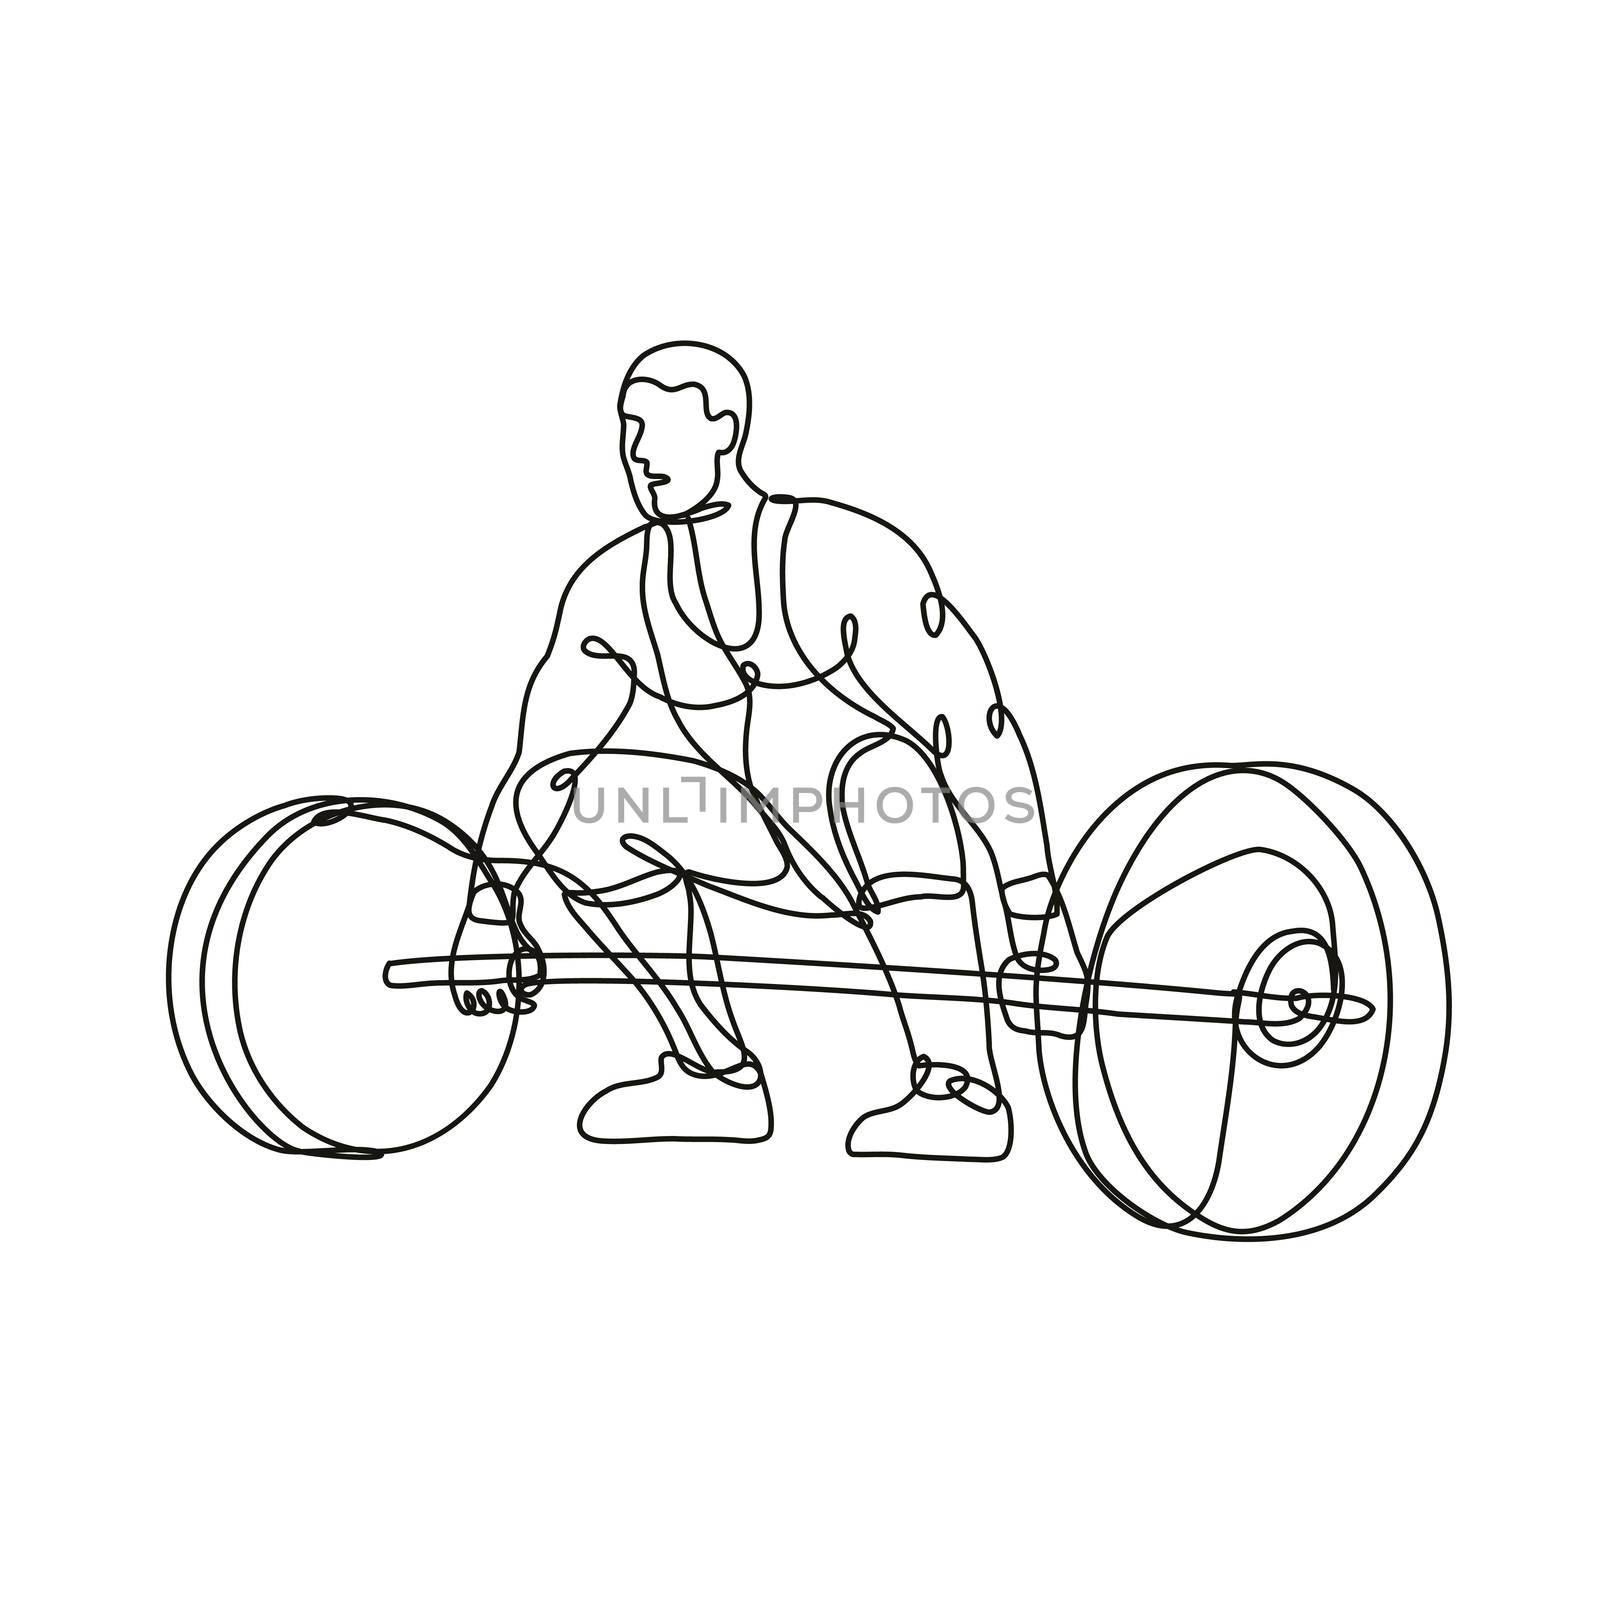 Continuous line drawing illustration of a weightlifter lifting heavy weight barbell viewed from front done in mono line or doodle style in black and white on isolated background. 
